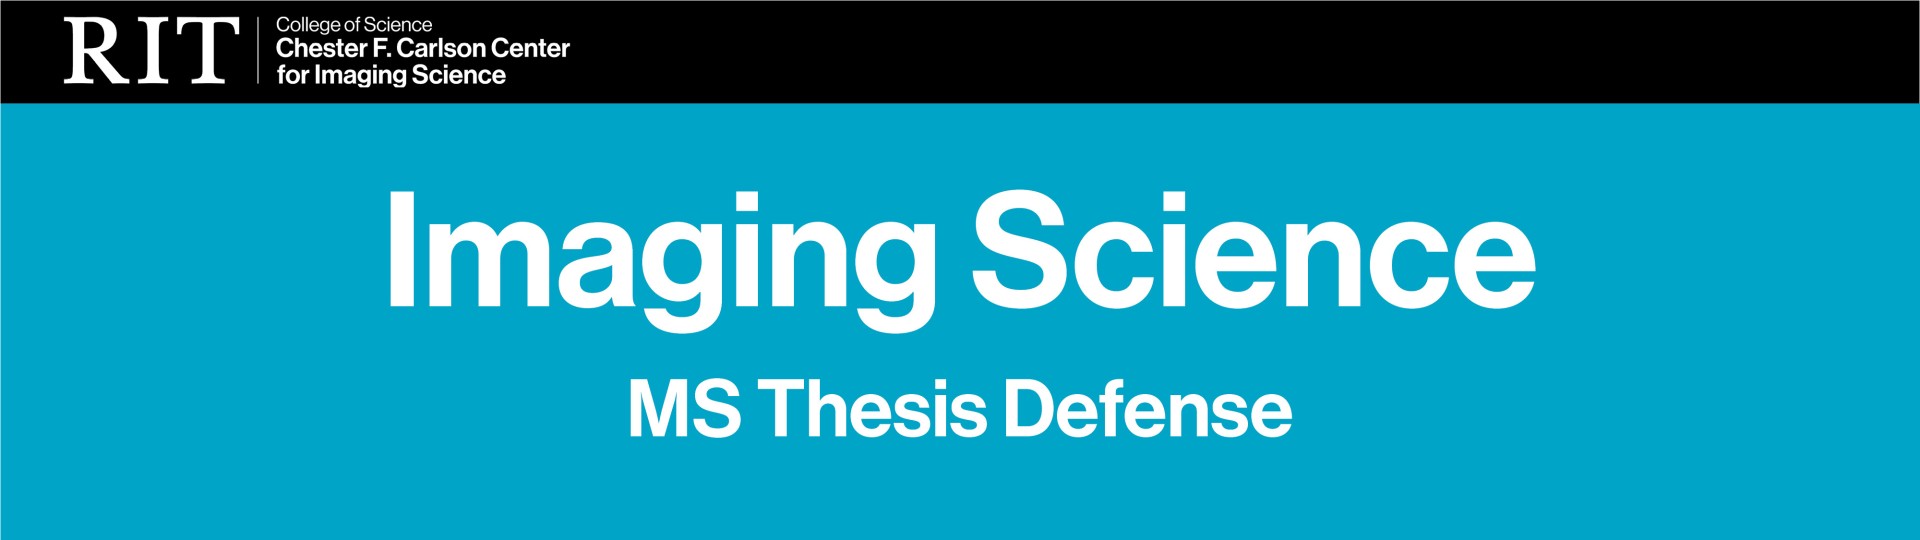 Imaging Science Thesis Defense